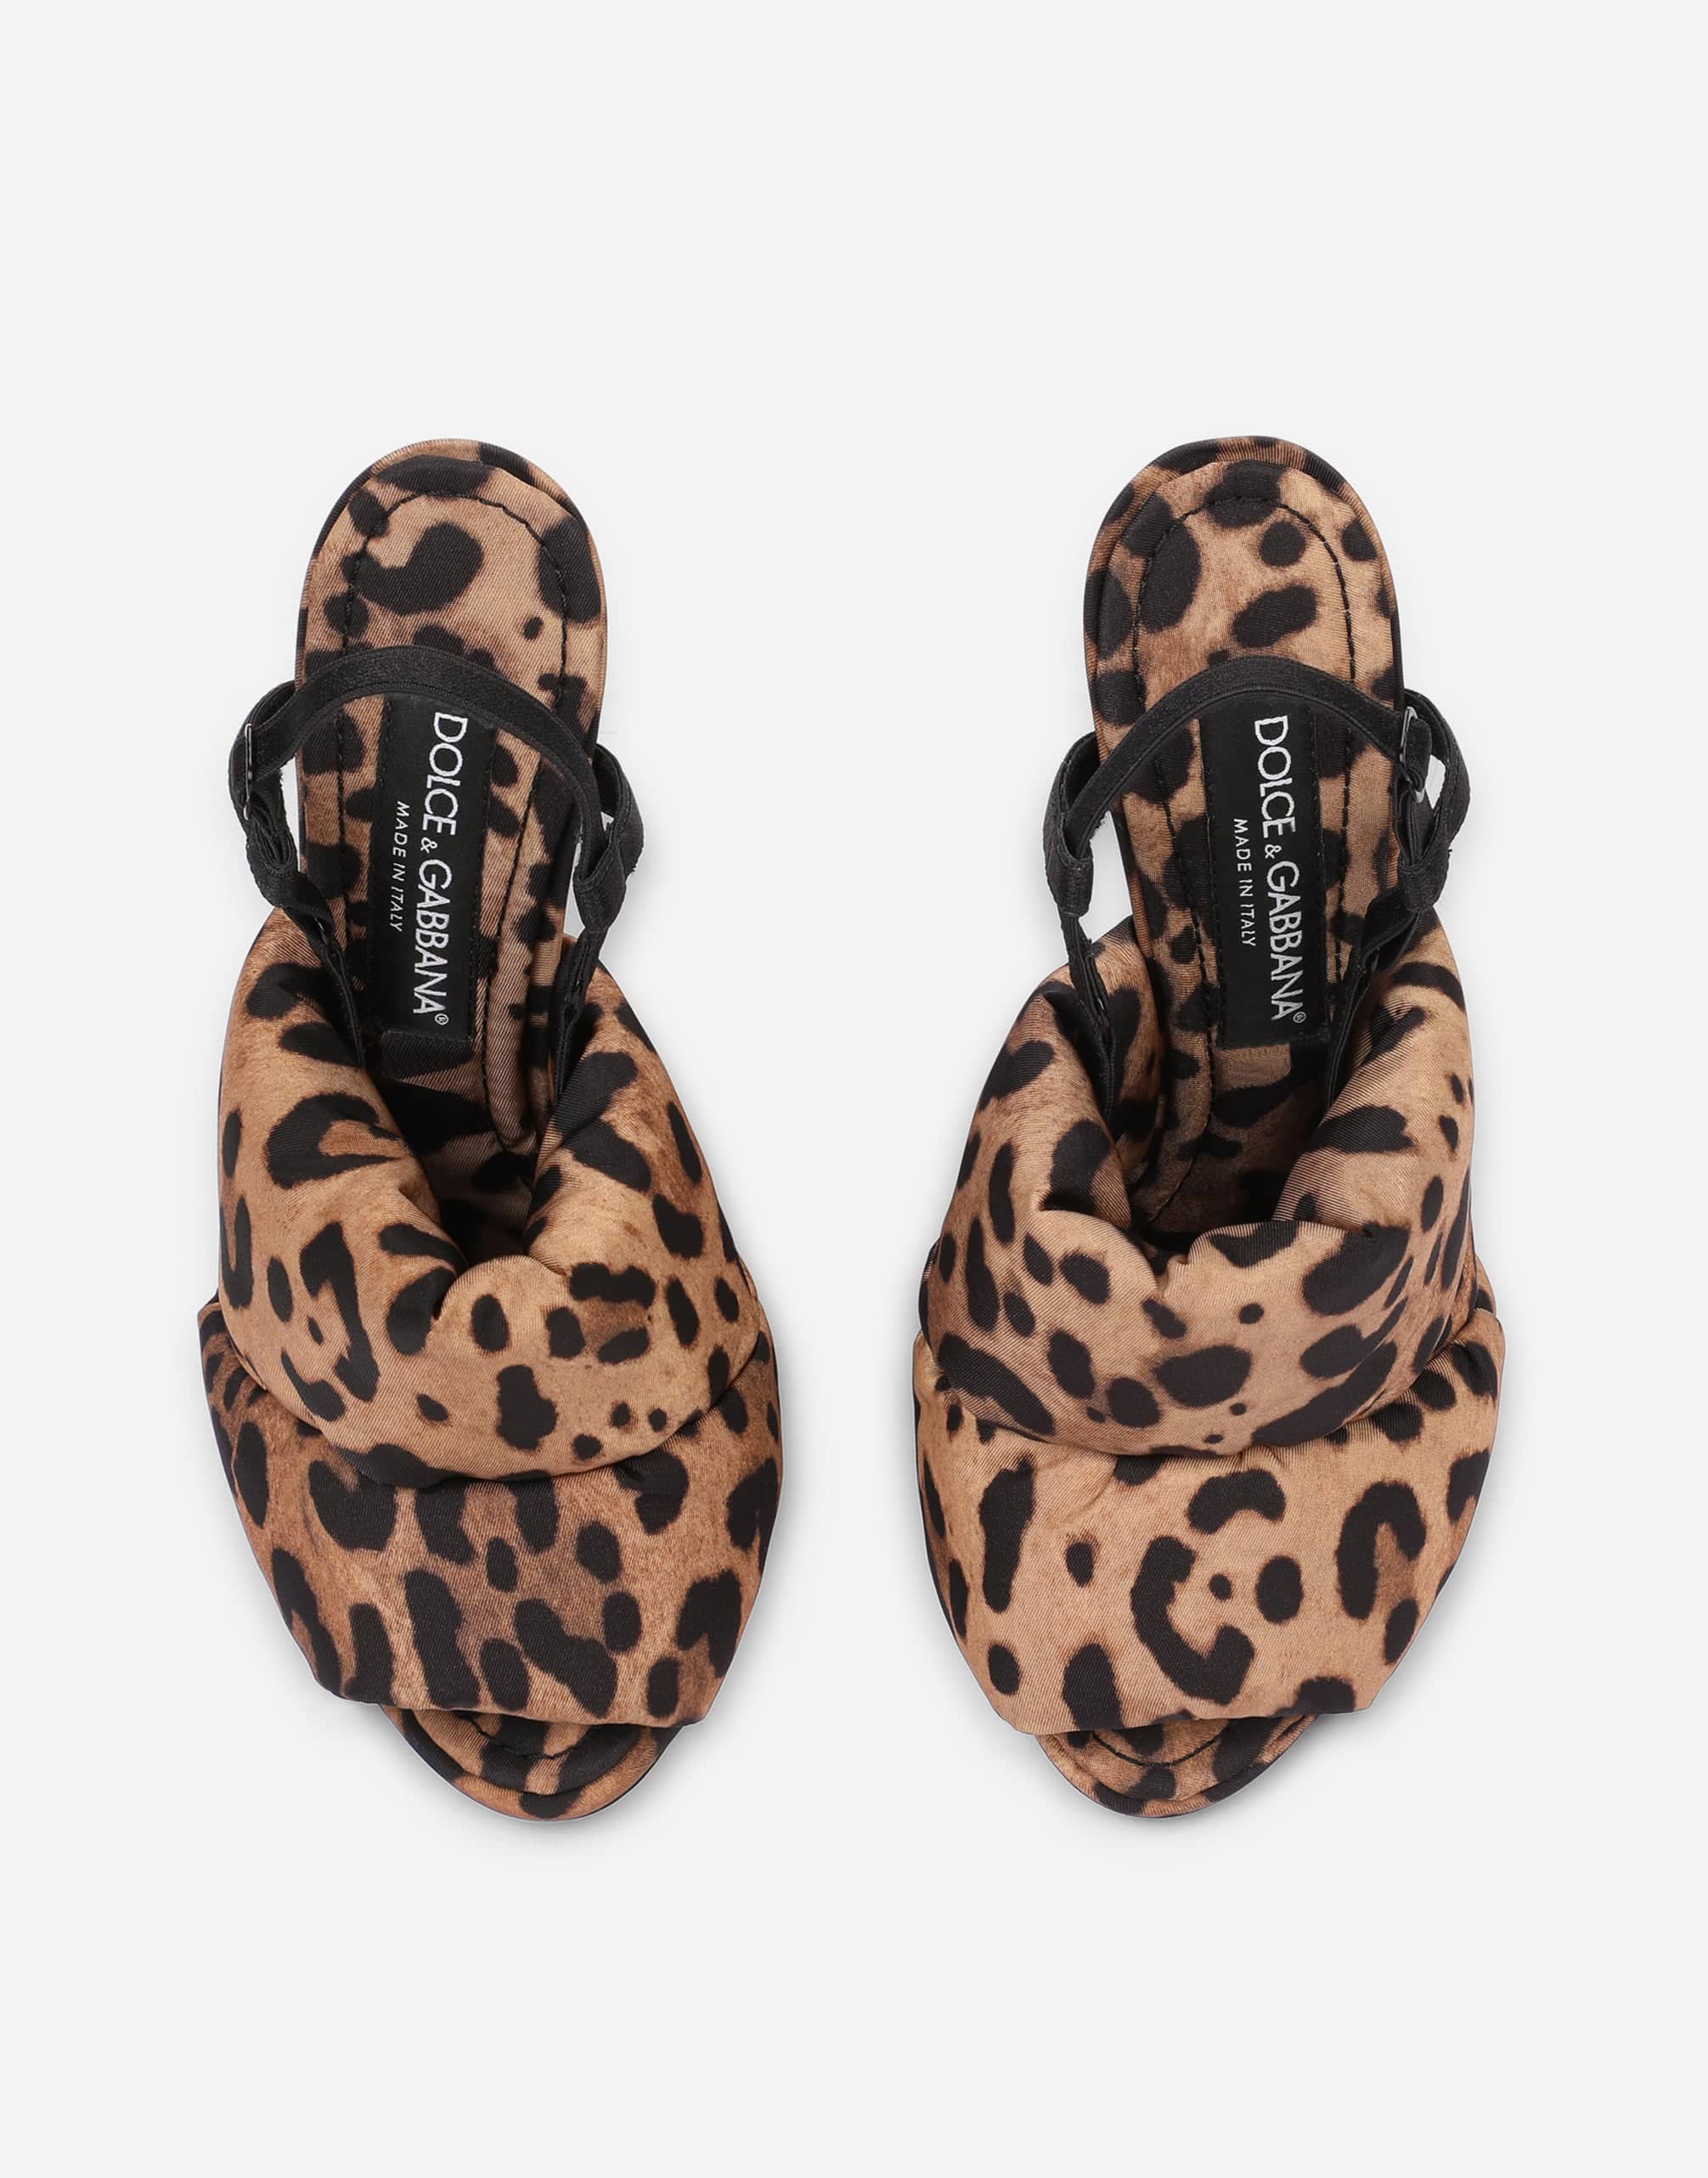 Dolce & Gabbana Quilted Leopard-Print Nylon Sandals